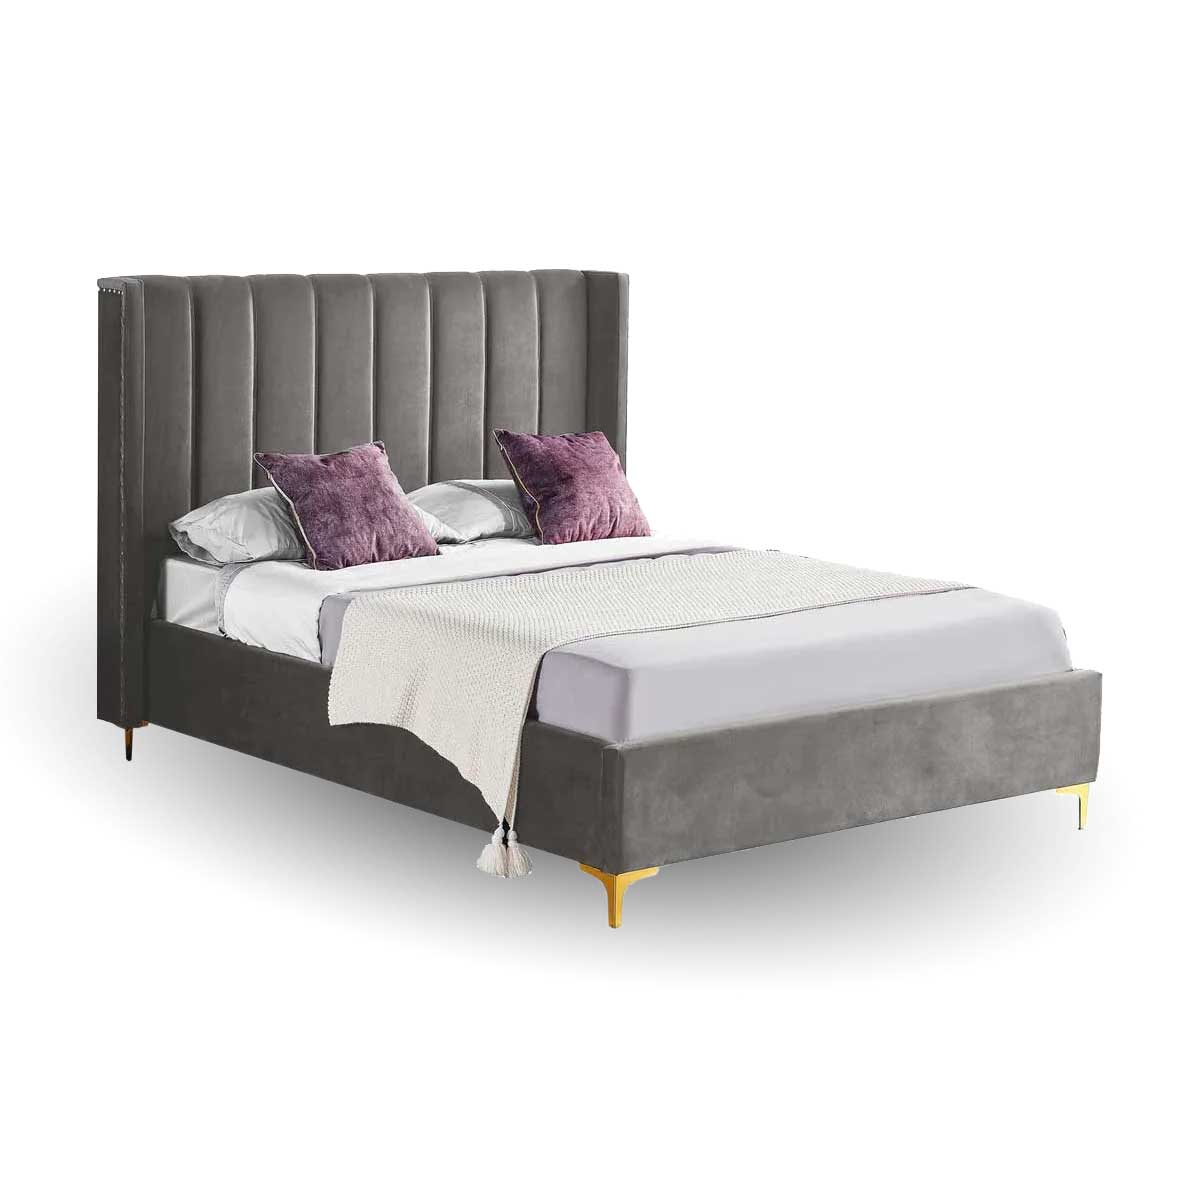 Colorado Grey Bed Frame - 2 Sizes Available